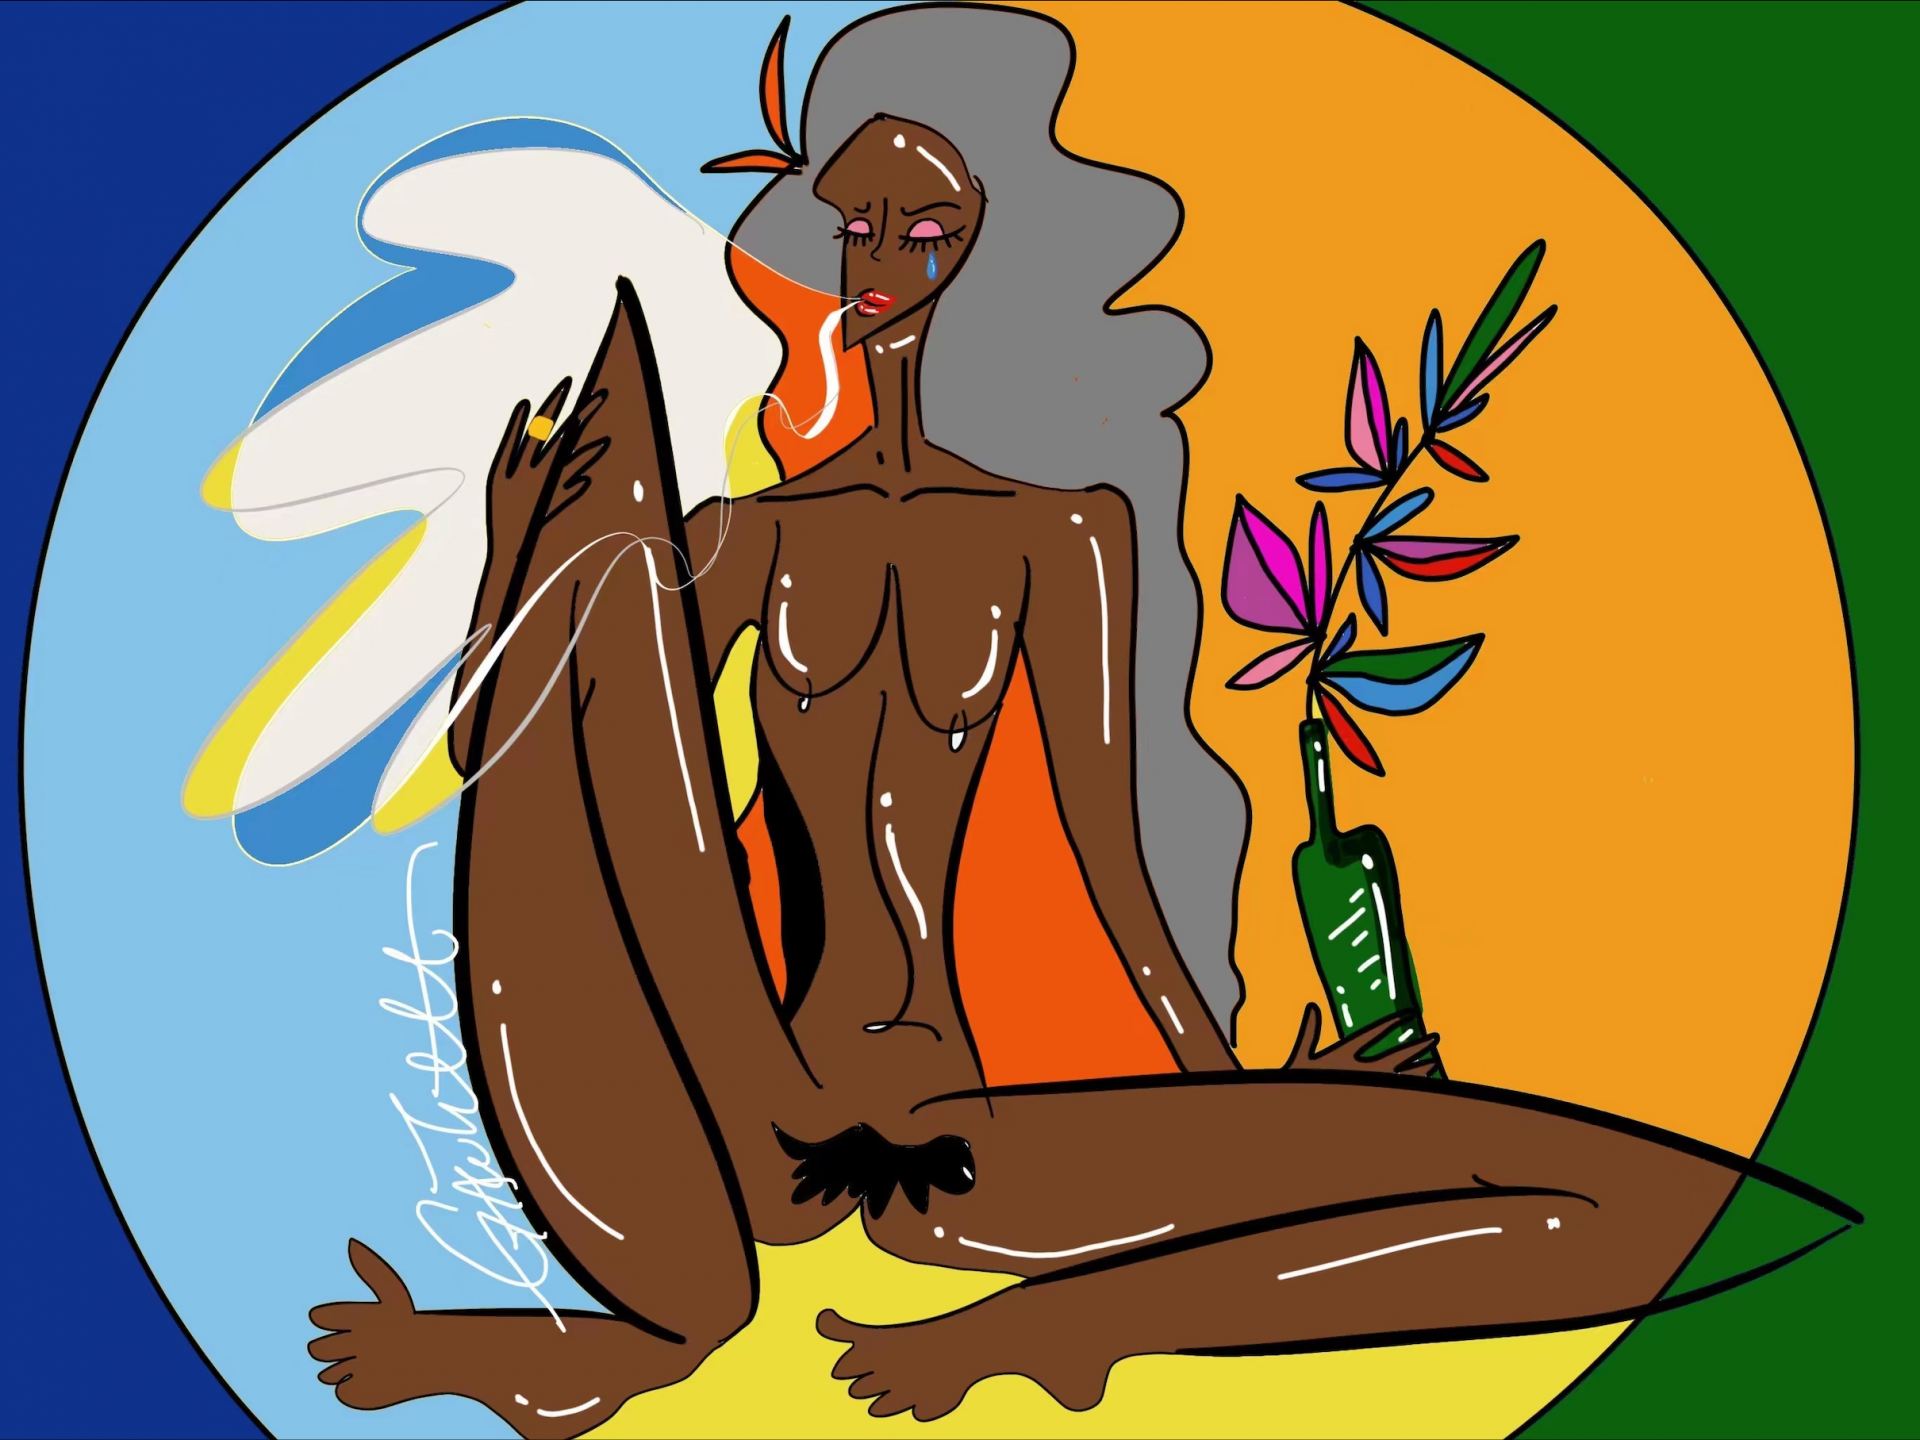 A digital painting of a nude female figure, smoking.